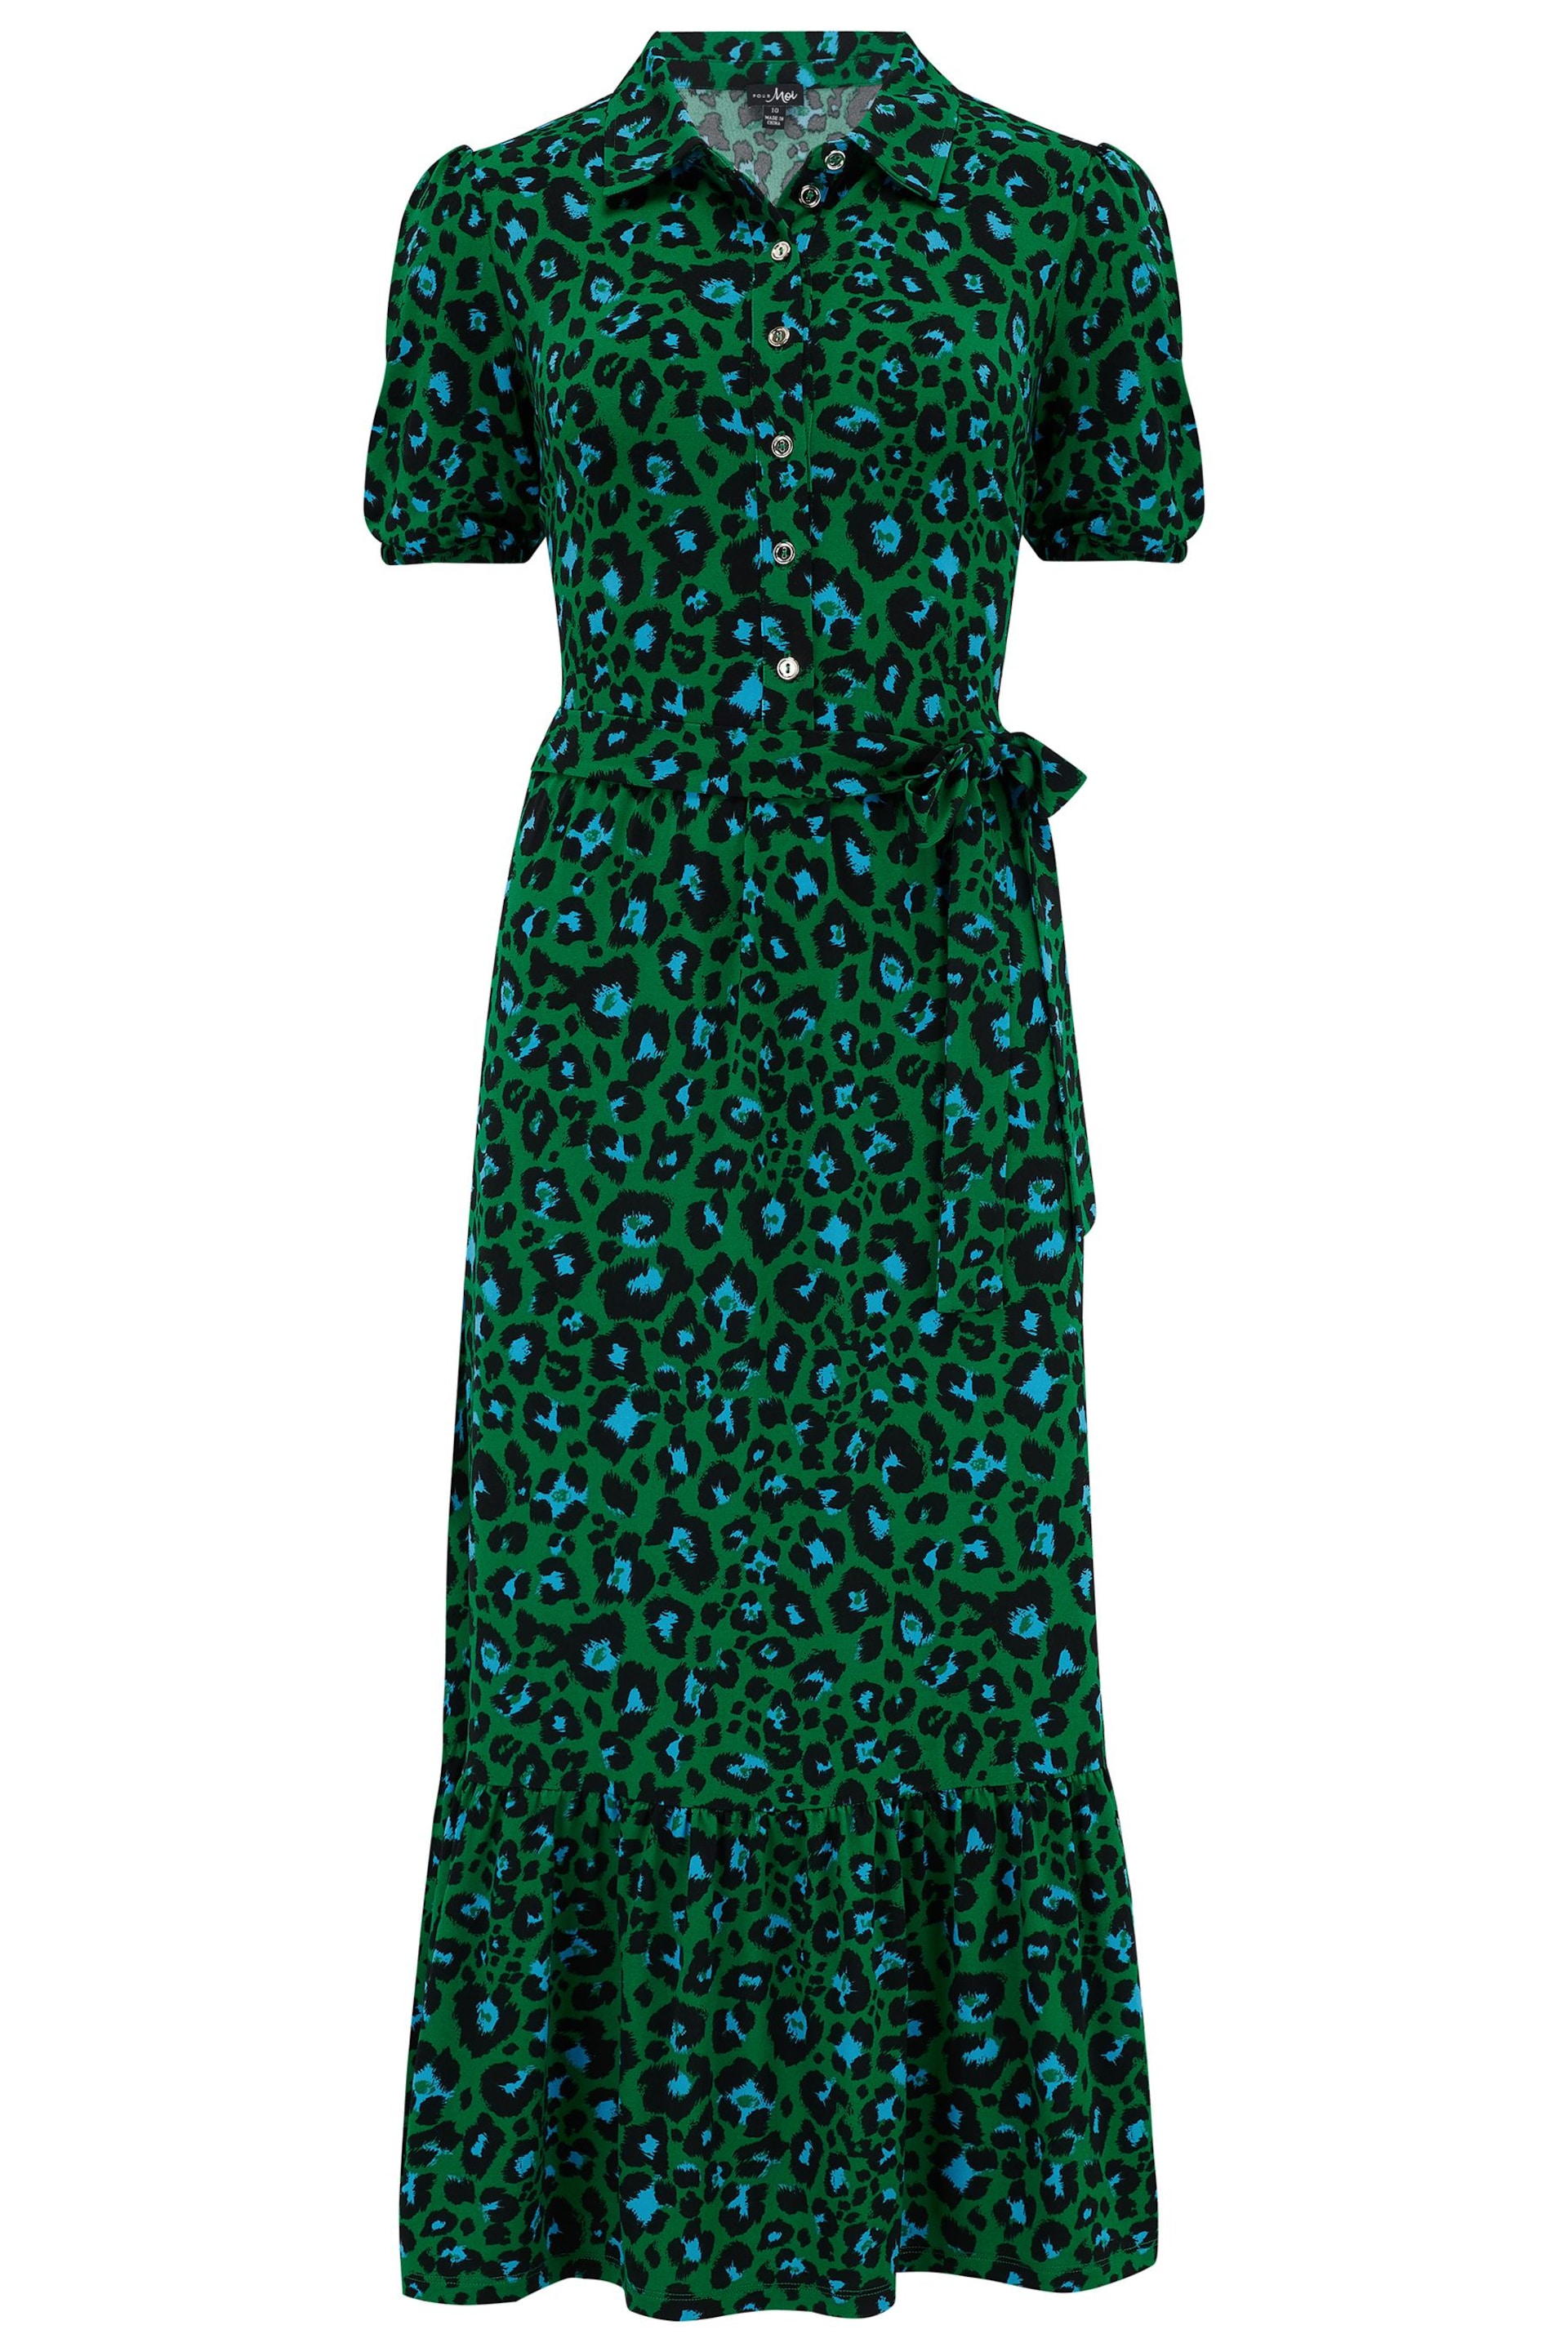 Pour Moi Green Jodie Fuller Bust Slinky Jersey Tiered Midi Shirt Dress - Image 4 of 5